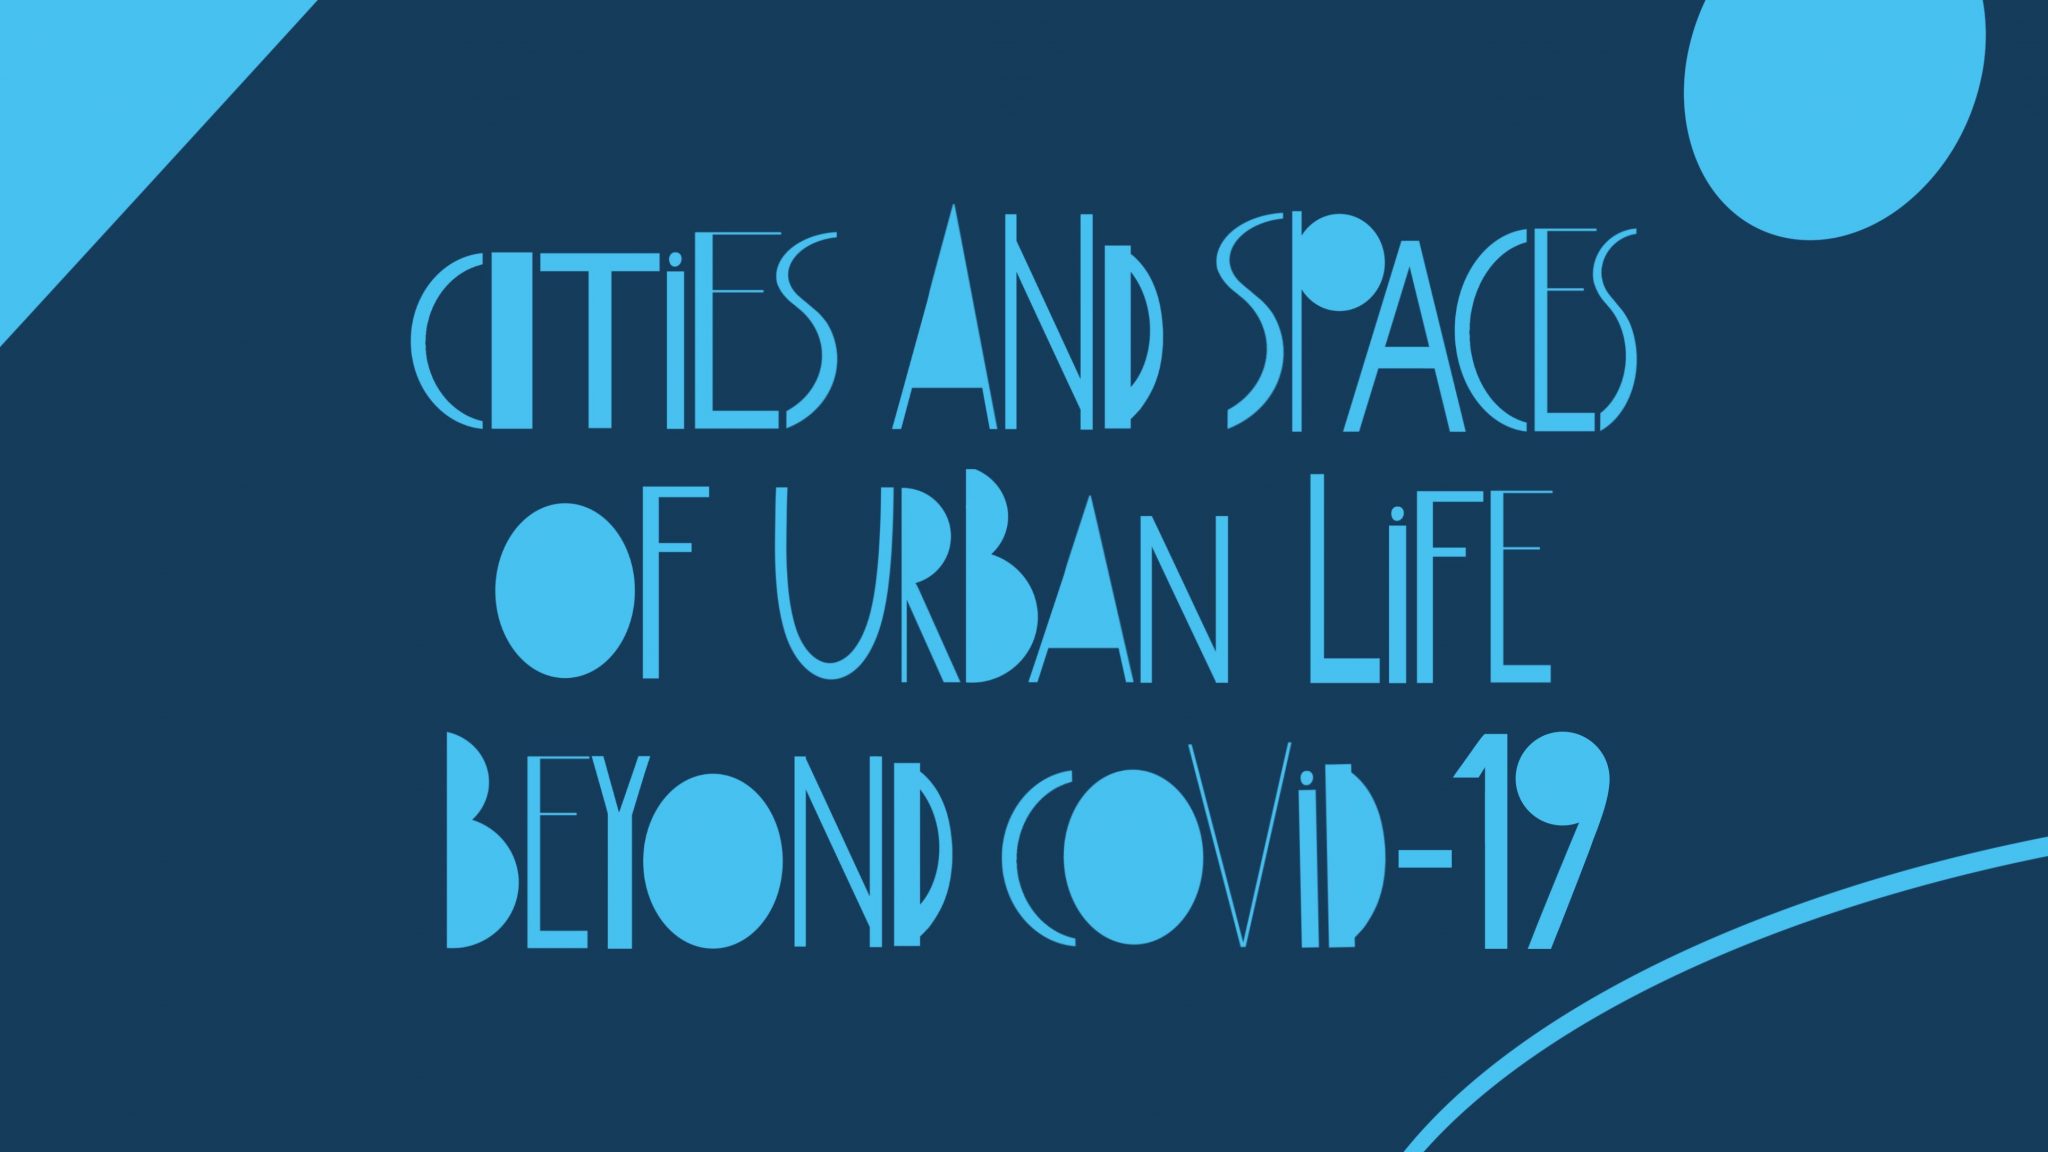 Dani Orisa 2021: Cities and spaces of urban life beyond Covid-19